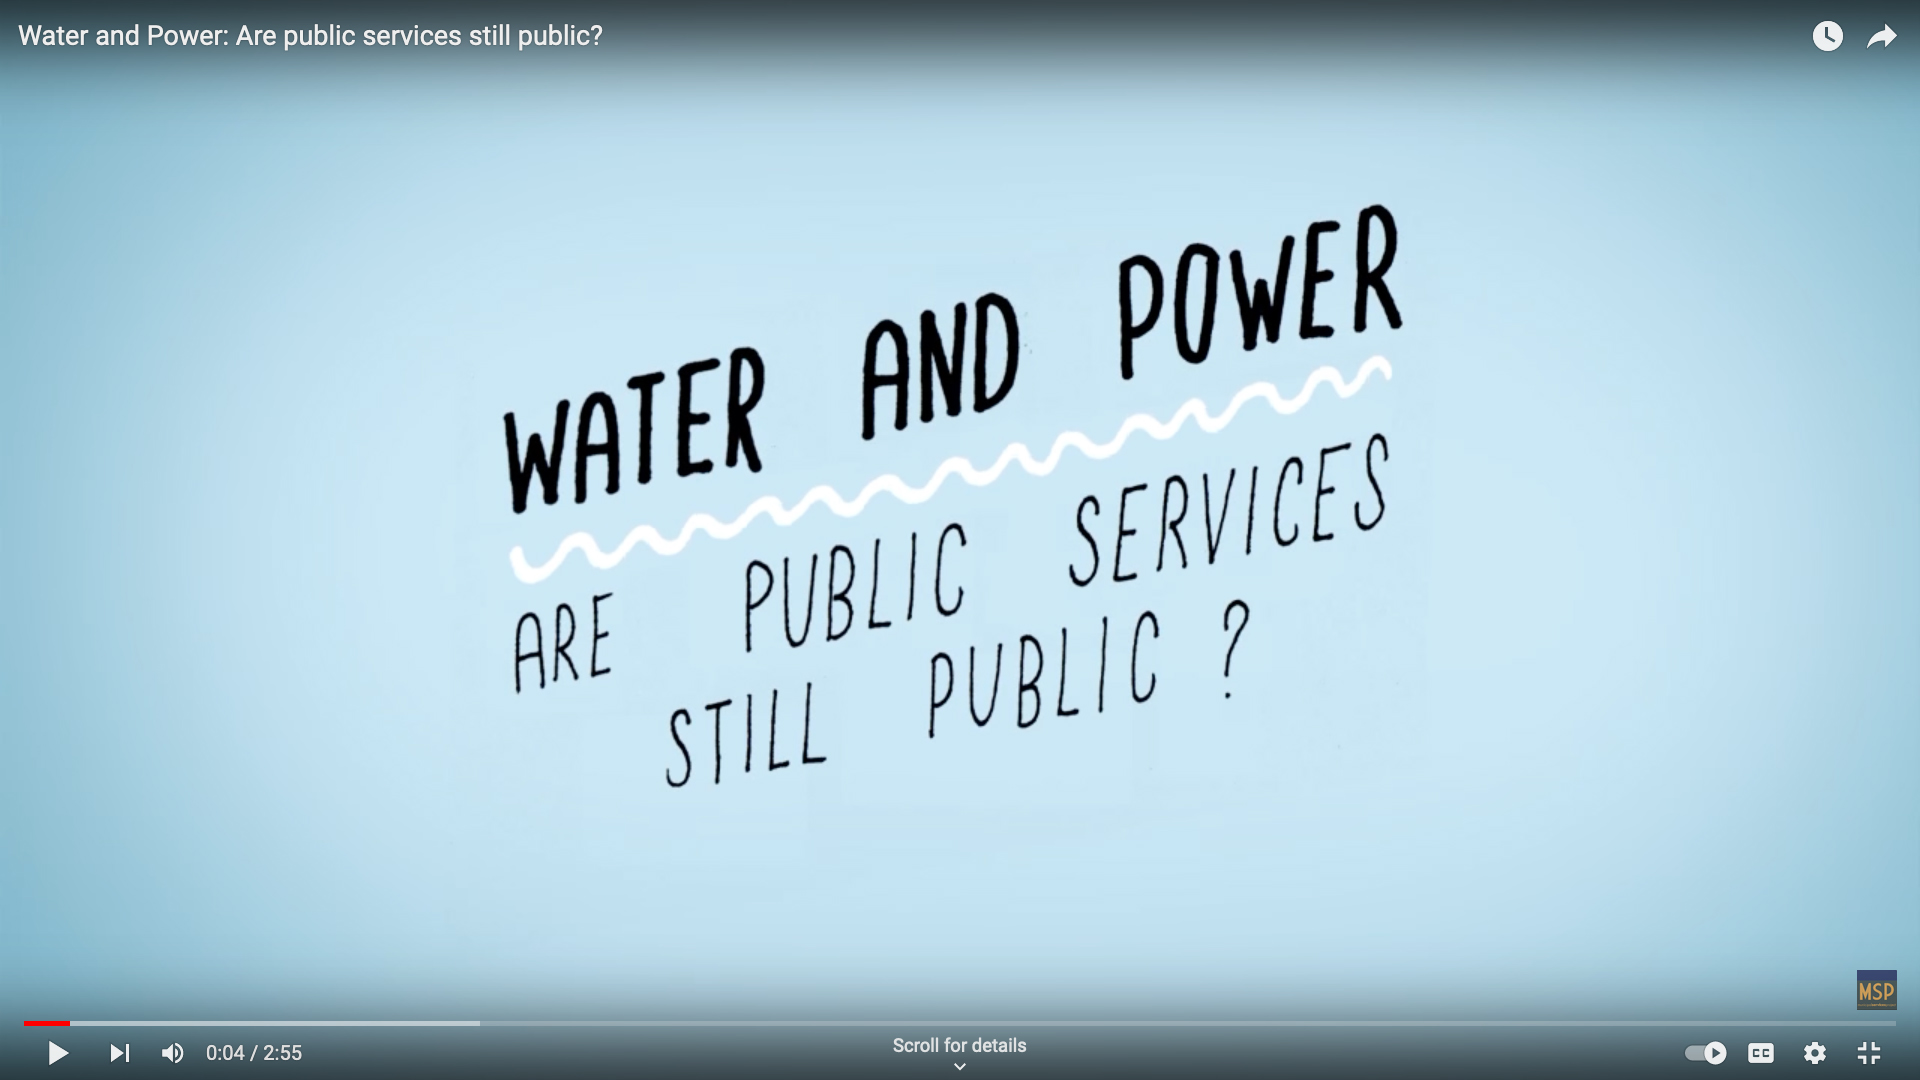 Water and Power: Are public services still public? image